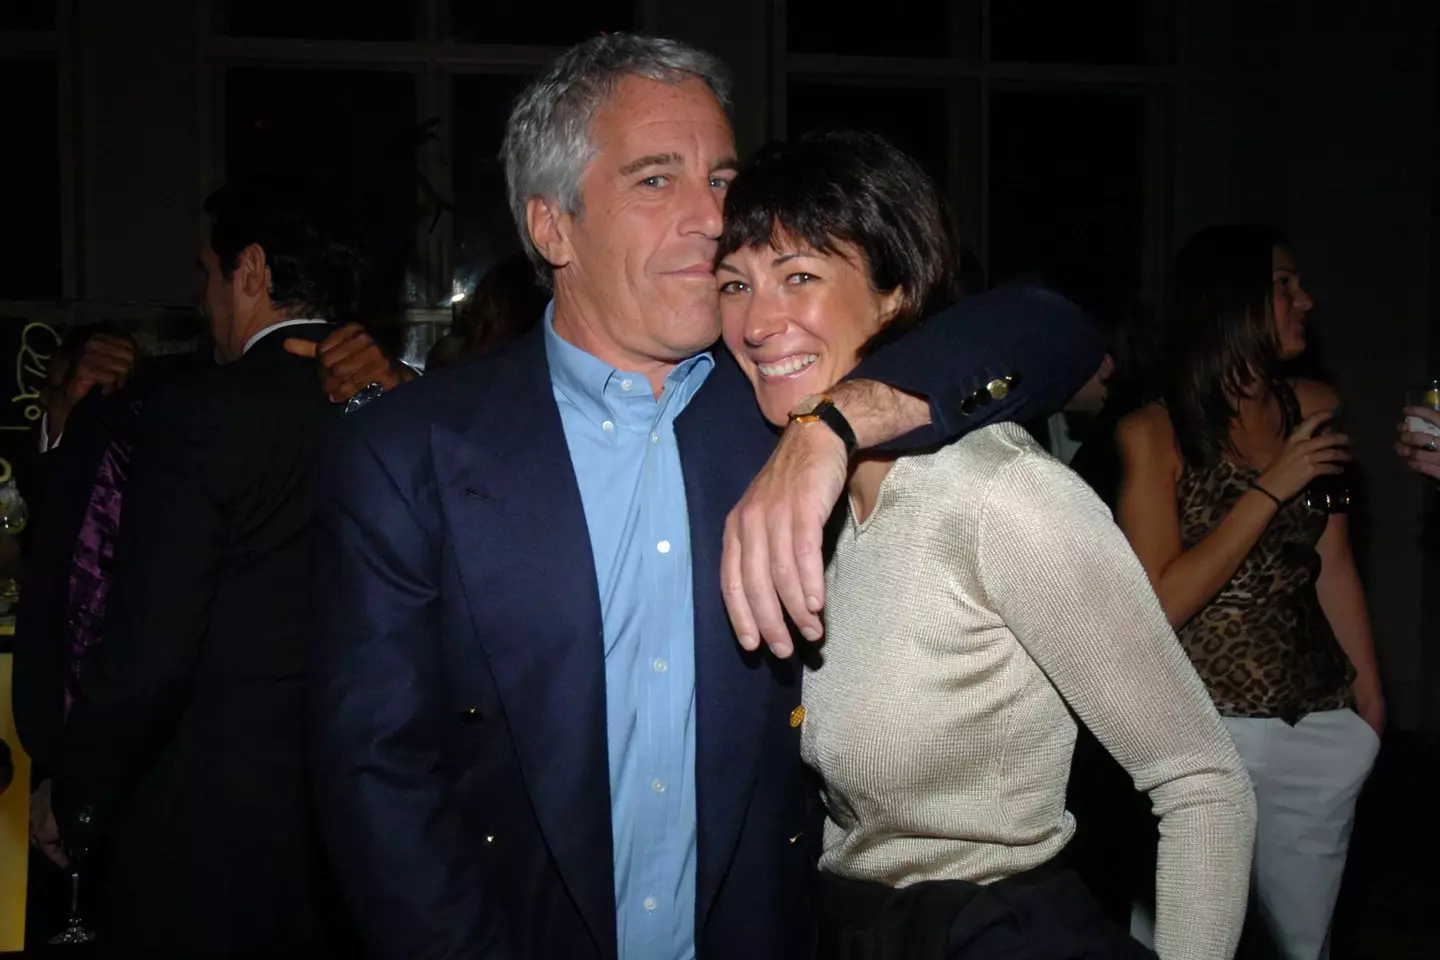 The documents feature an email Jeffrey Epstein sent to Ghislaine Maxwell.